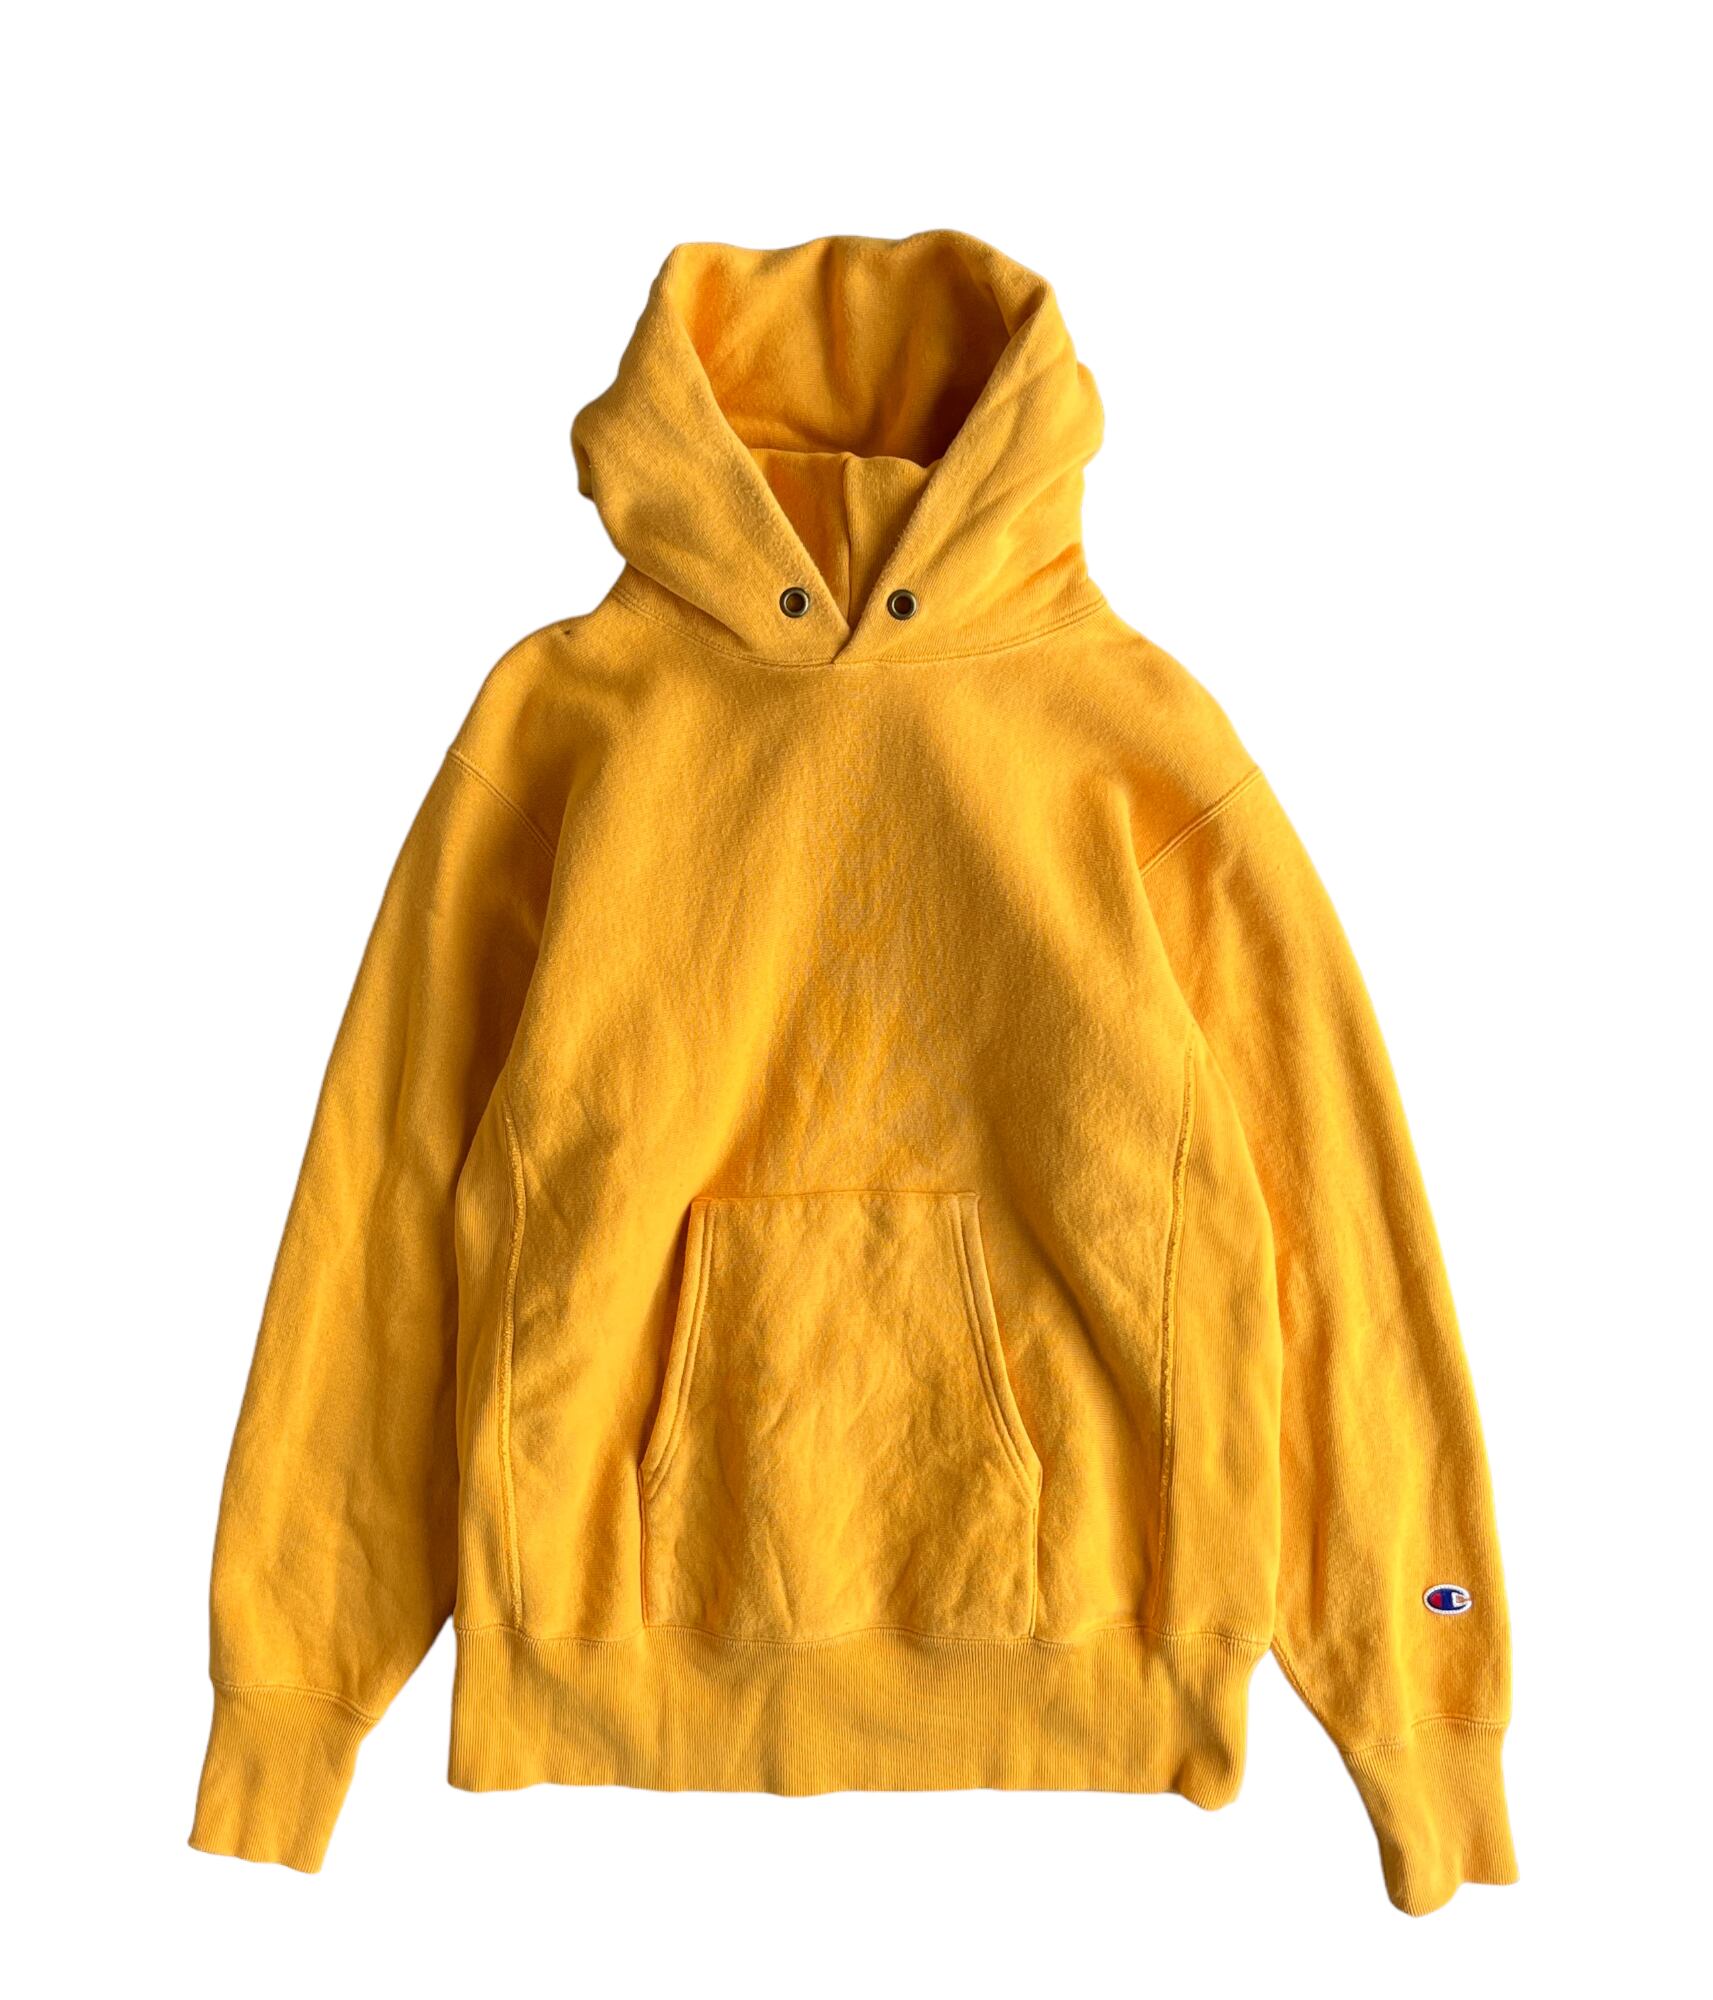 Used L Champion Reverse Weave Hoodie -Yellow- | BEGGARS BANQUET公式通販サイト  古着・ヴィンテージ